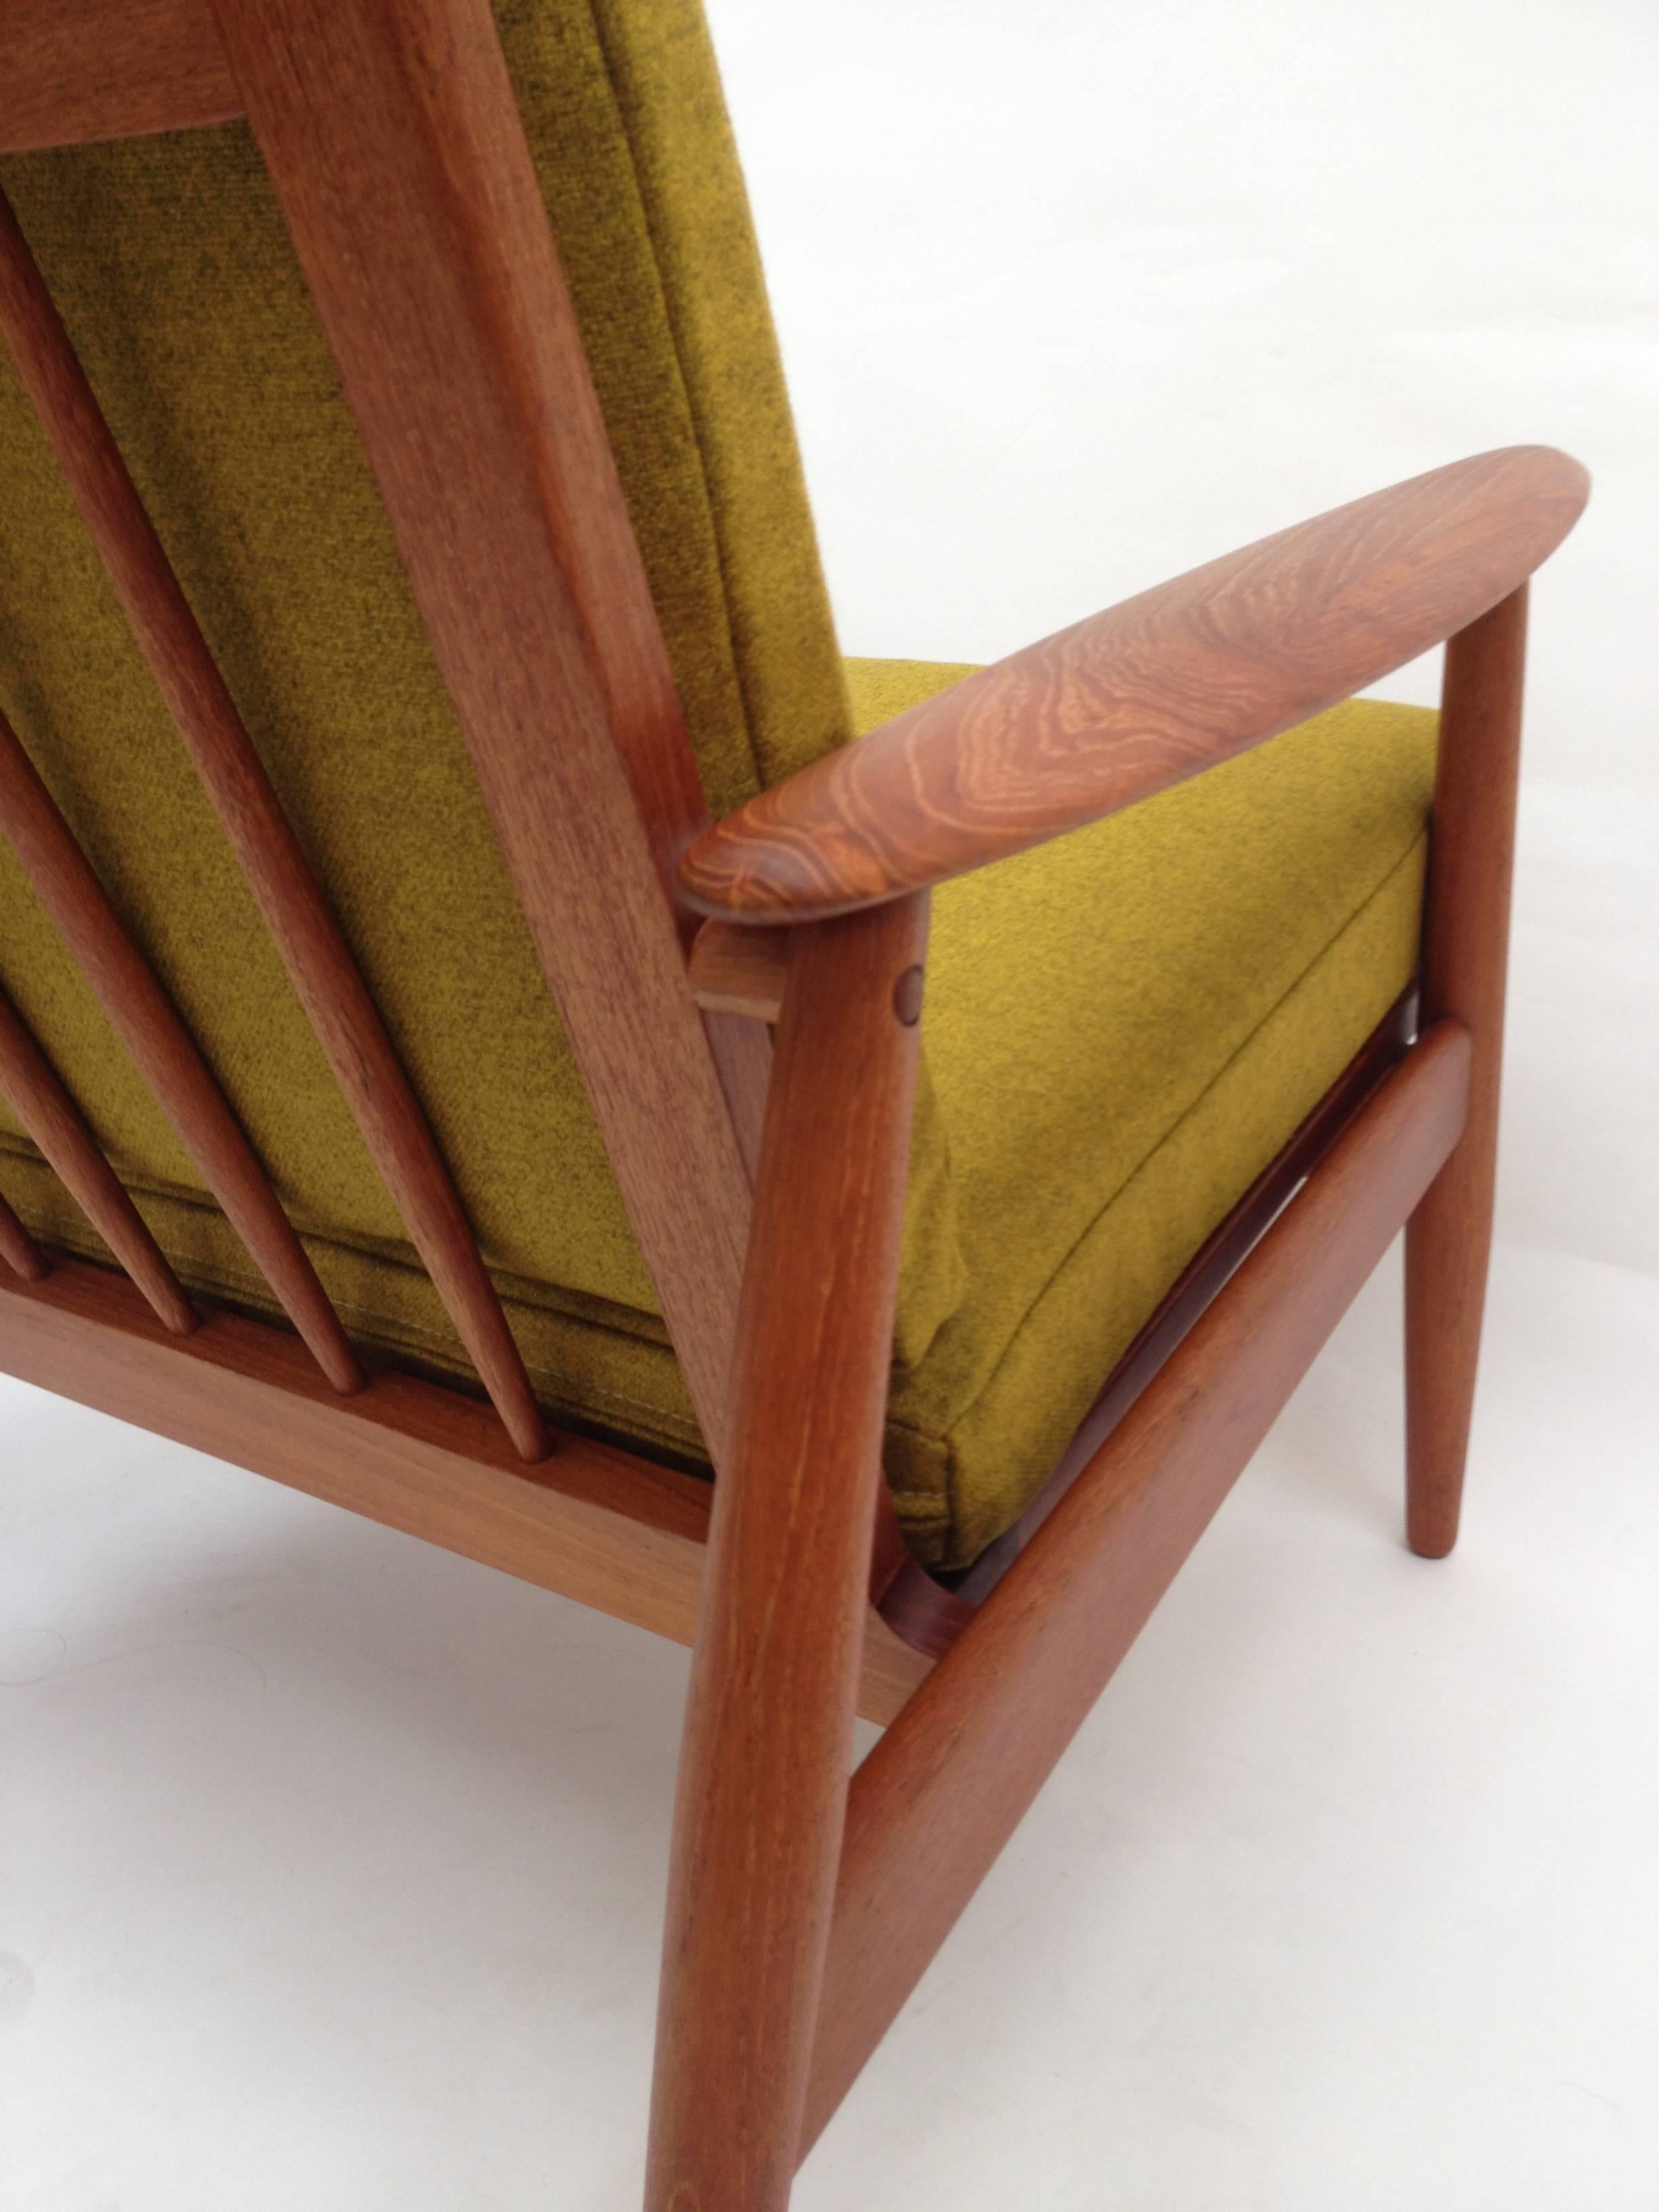 Spectacular Pair of 1960s Danish Modern Teak Easy Chairs, Made in Denmark In Good Condition For Sale In Victoria, British Columbia